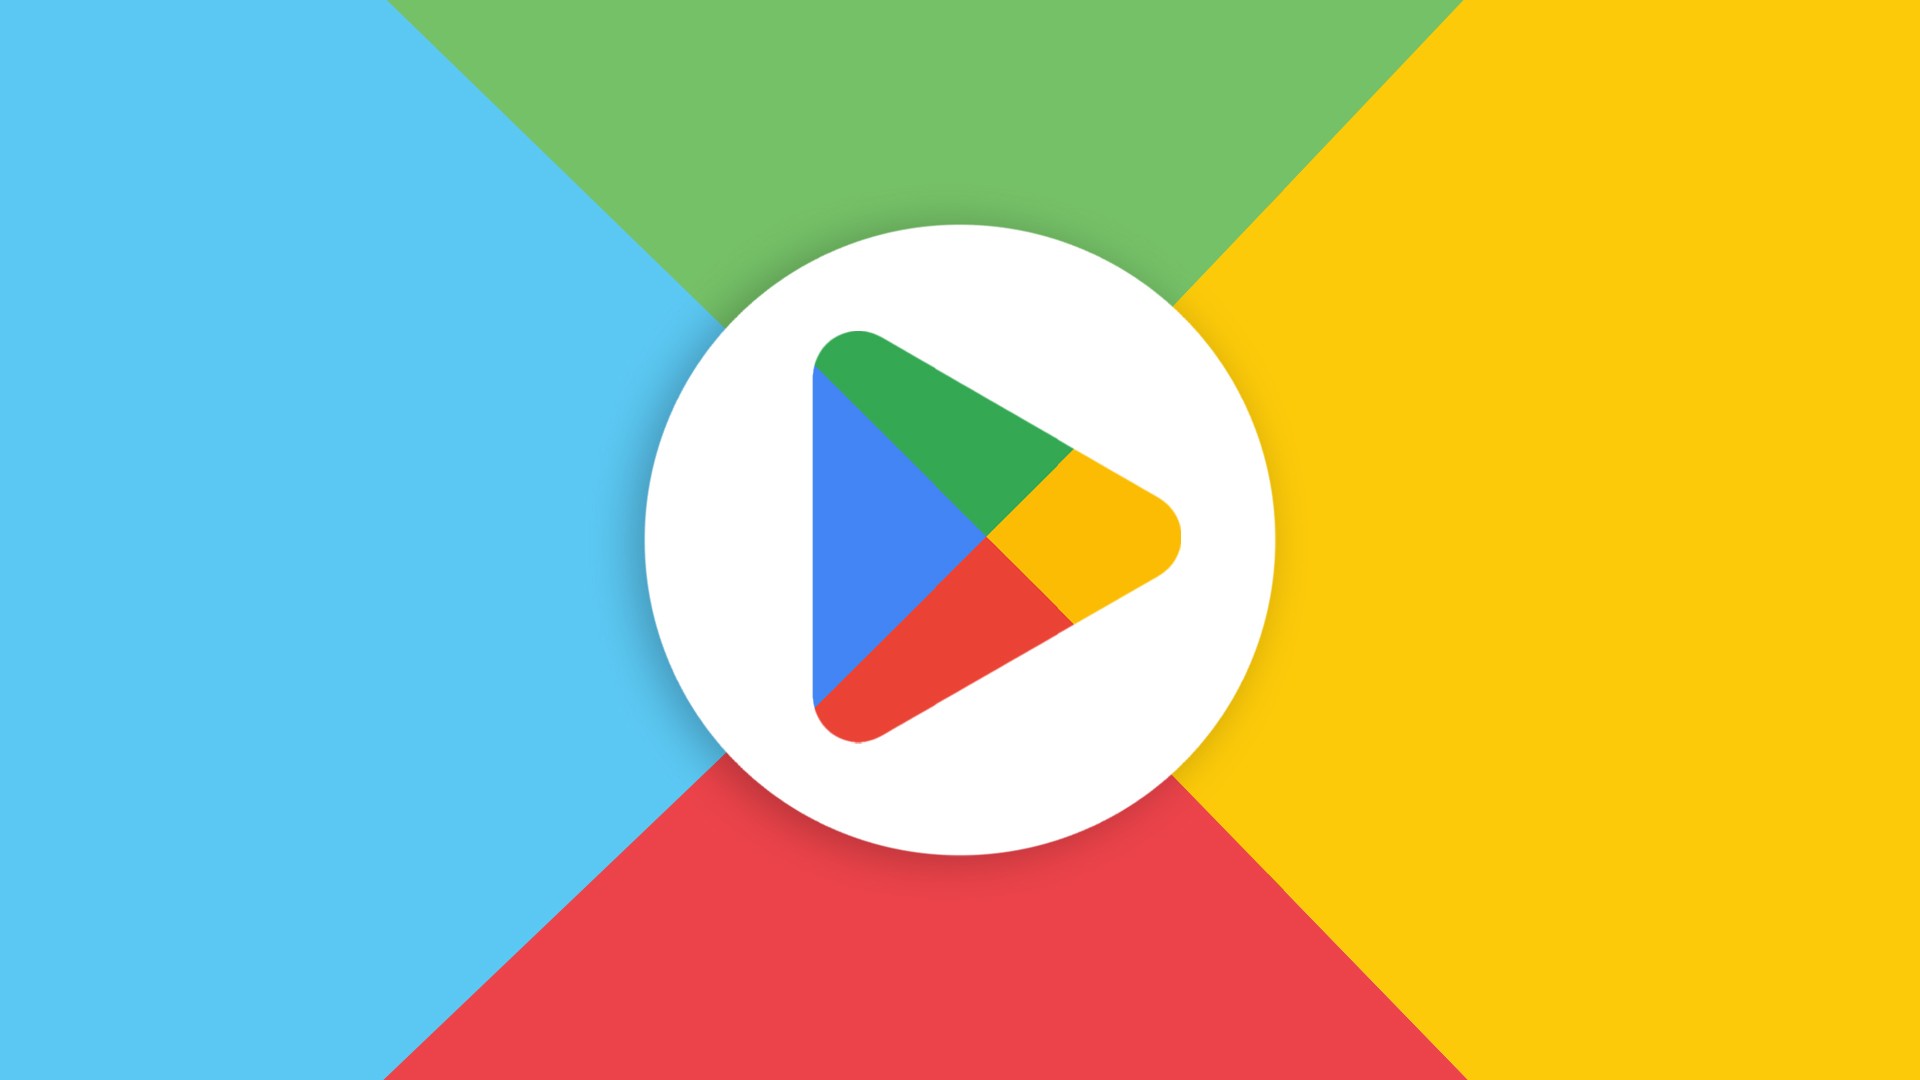 Google is introducing a new layer of security in the Play Store to prevent purchases made by children